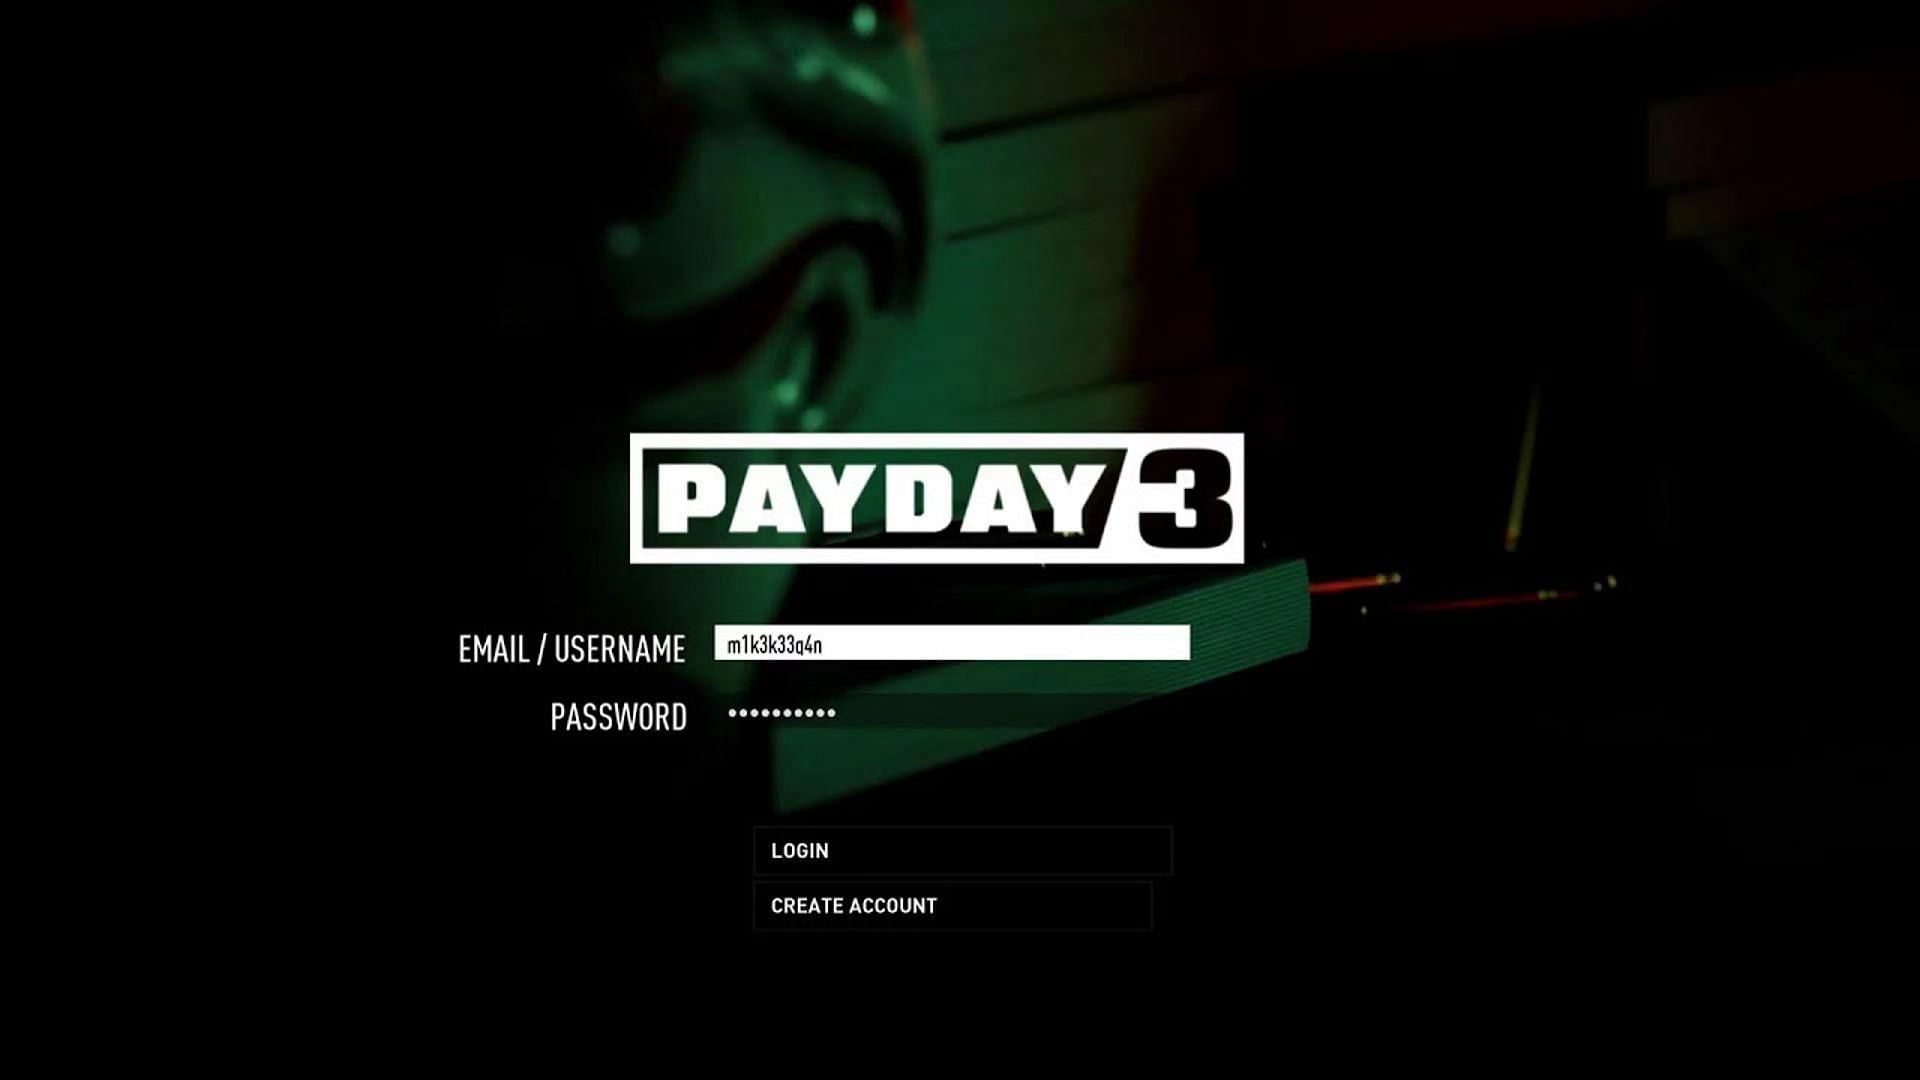 How to login to payday 3｜TikTok Search